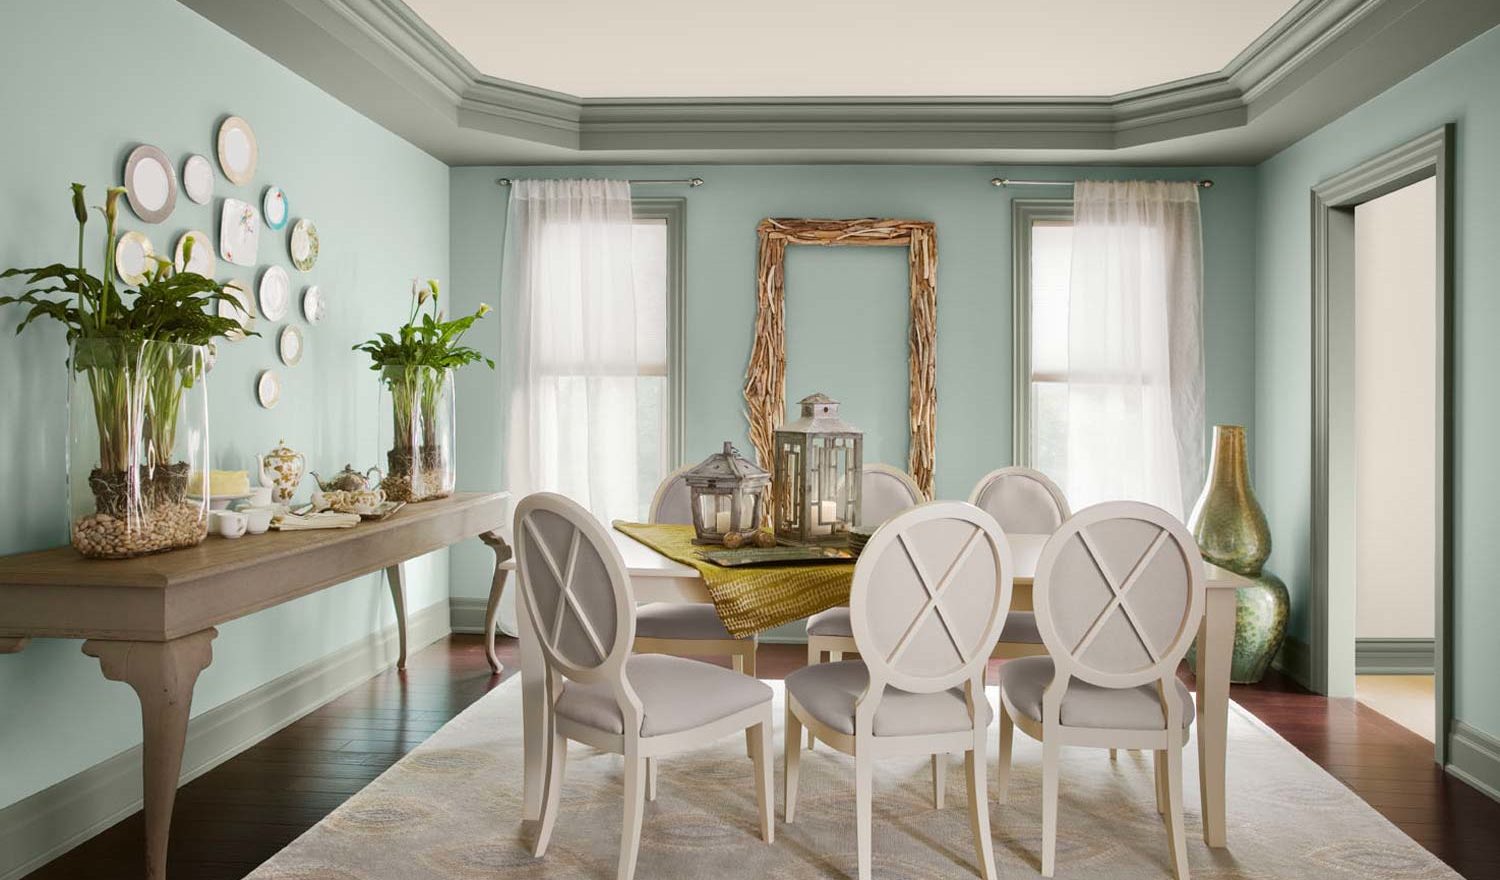 Exotic-cool-room-painting-ideas-with-white-interior-for-dining-chair-and-table-also-sky-blue-for-wall-interior